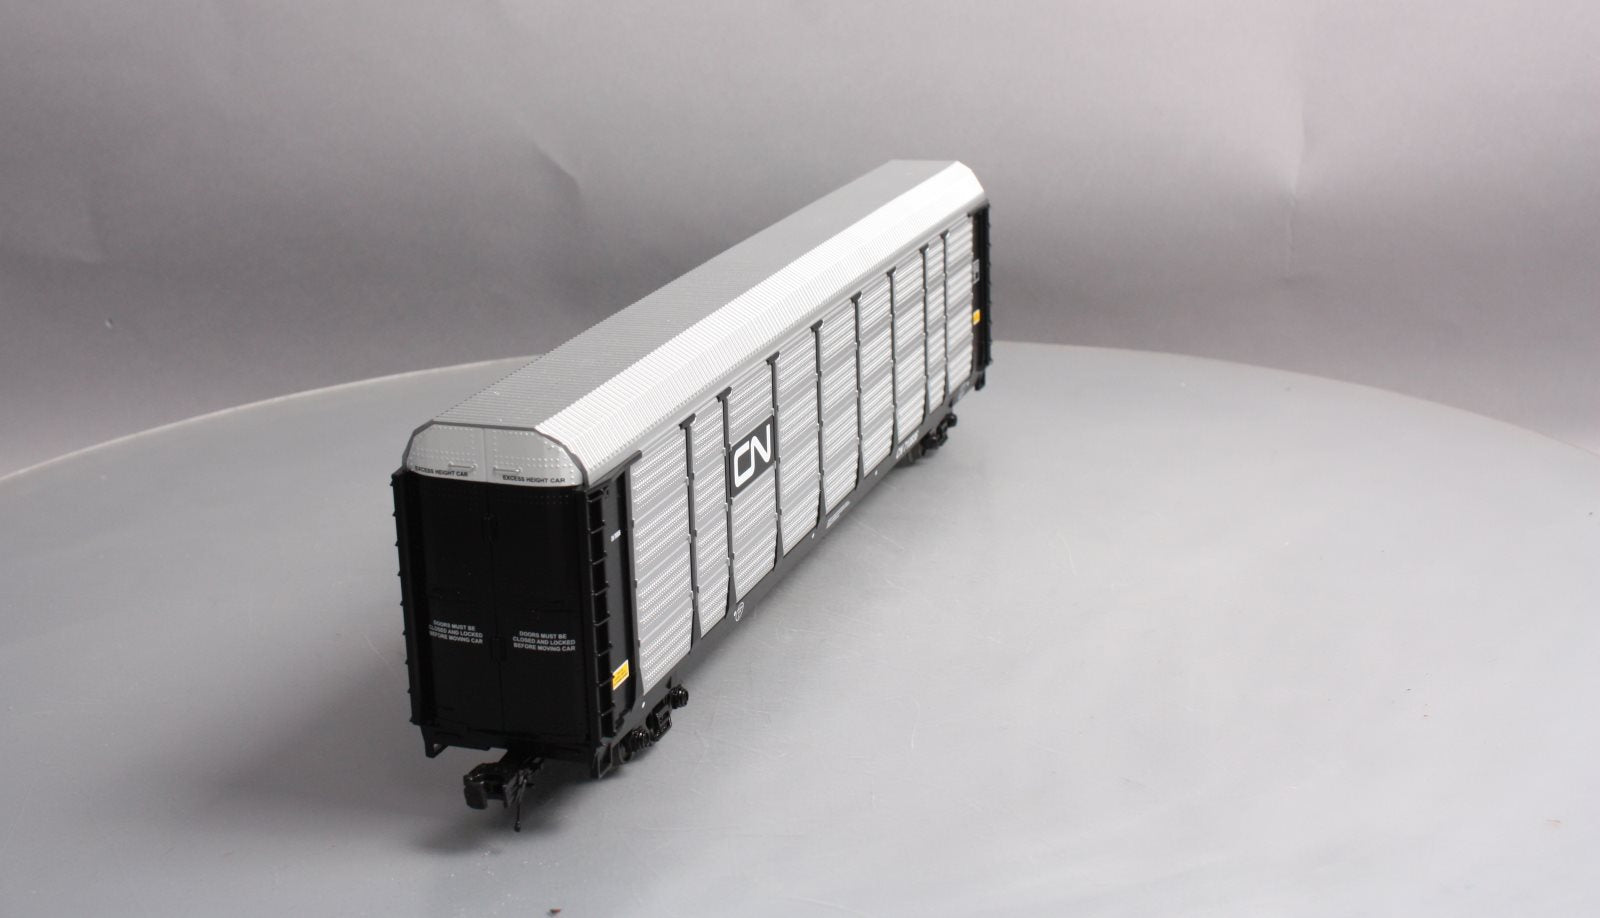 MTH 20-98712 Canadian National Corrugated Auto Carrier